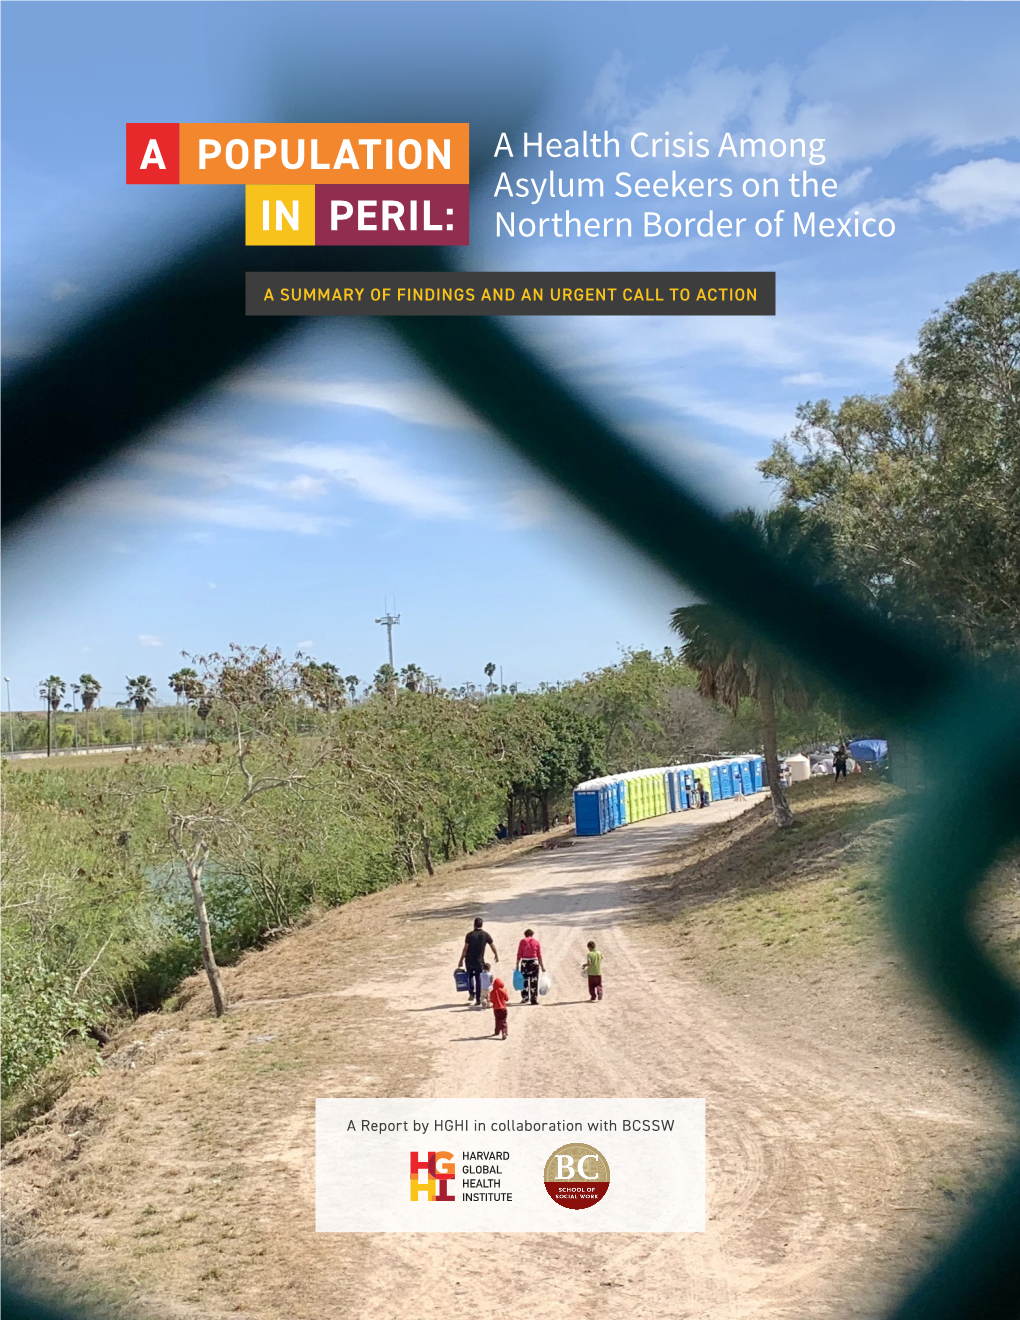 A Population in Peril: a Health Crisis Among Asylum Seekers on the Northern Border of Mexico